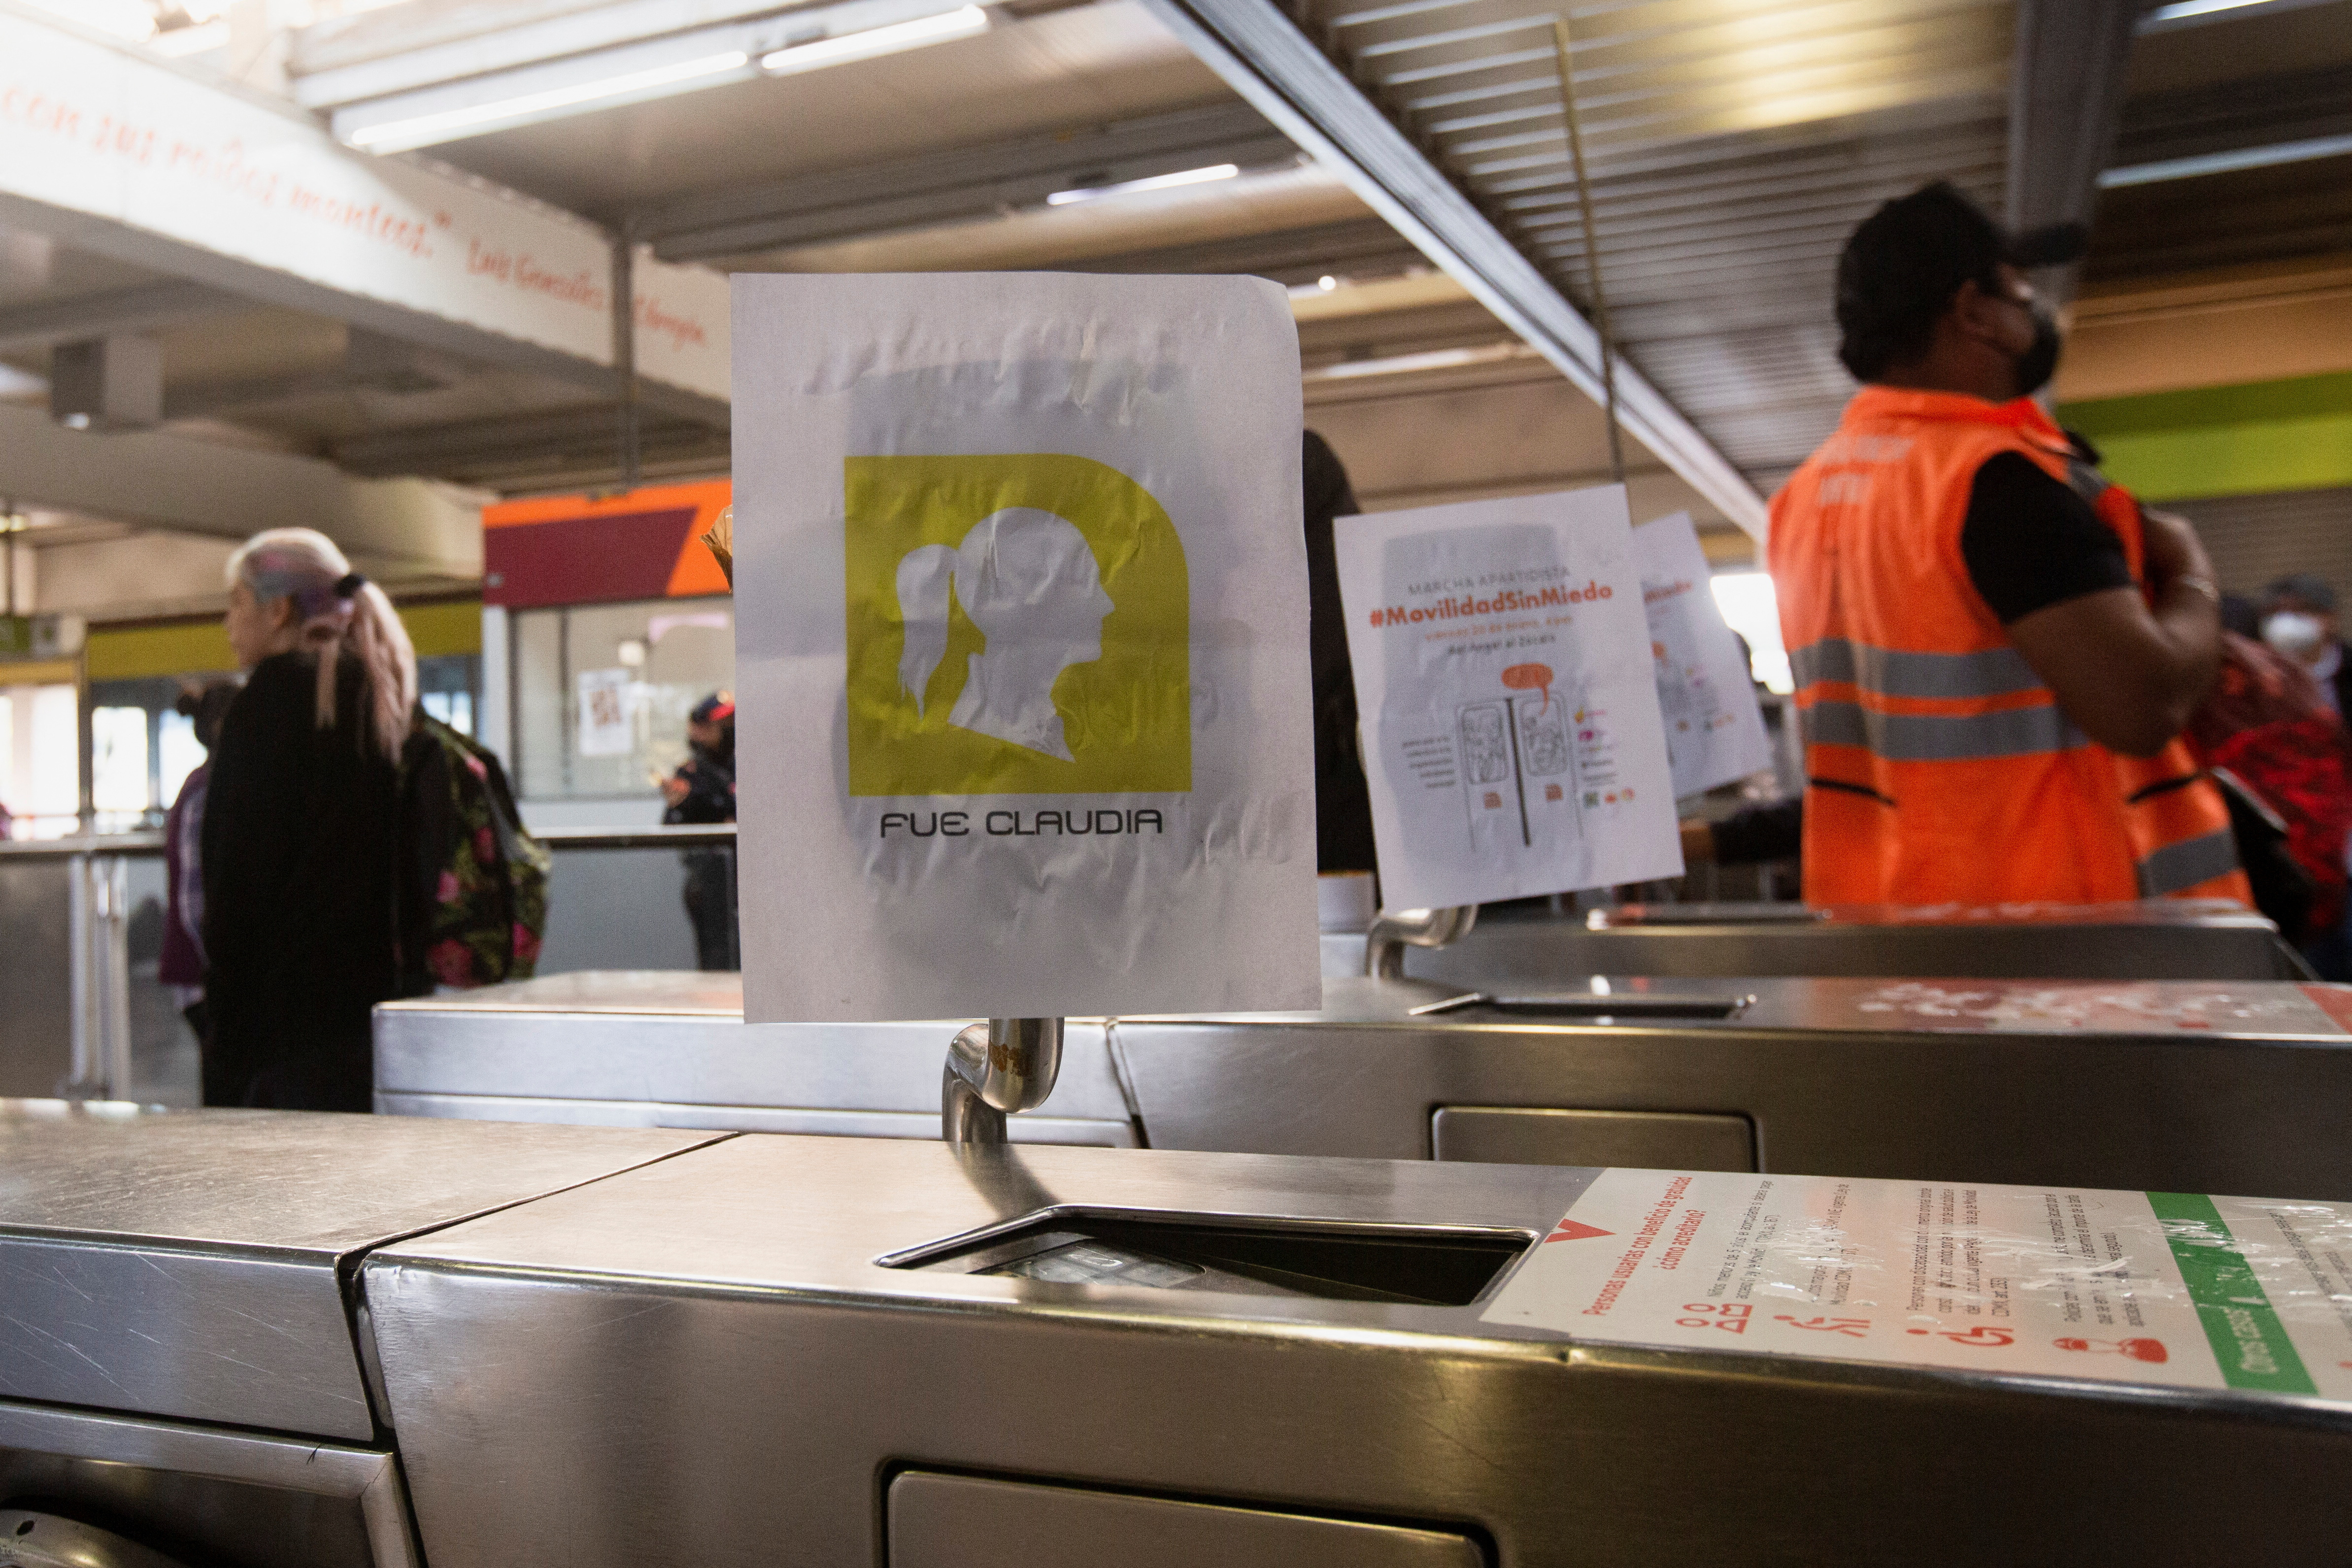 A poster with an outline of Mexico City Mayor Claudia Sheinbaum, which reads "It was Claudia", is seen on a turnstile, as part of a protest demonstrators dub "popular subway", to let people ride for free, at the Ciudad Universitaria metro station, to demand justice for Yaretzi Adriana, who died in a train crash on January 7, 2023, in Mexico City, Mexico January 12, 2023. REUTERS/Quetzalli Nicte-Ha